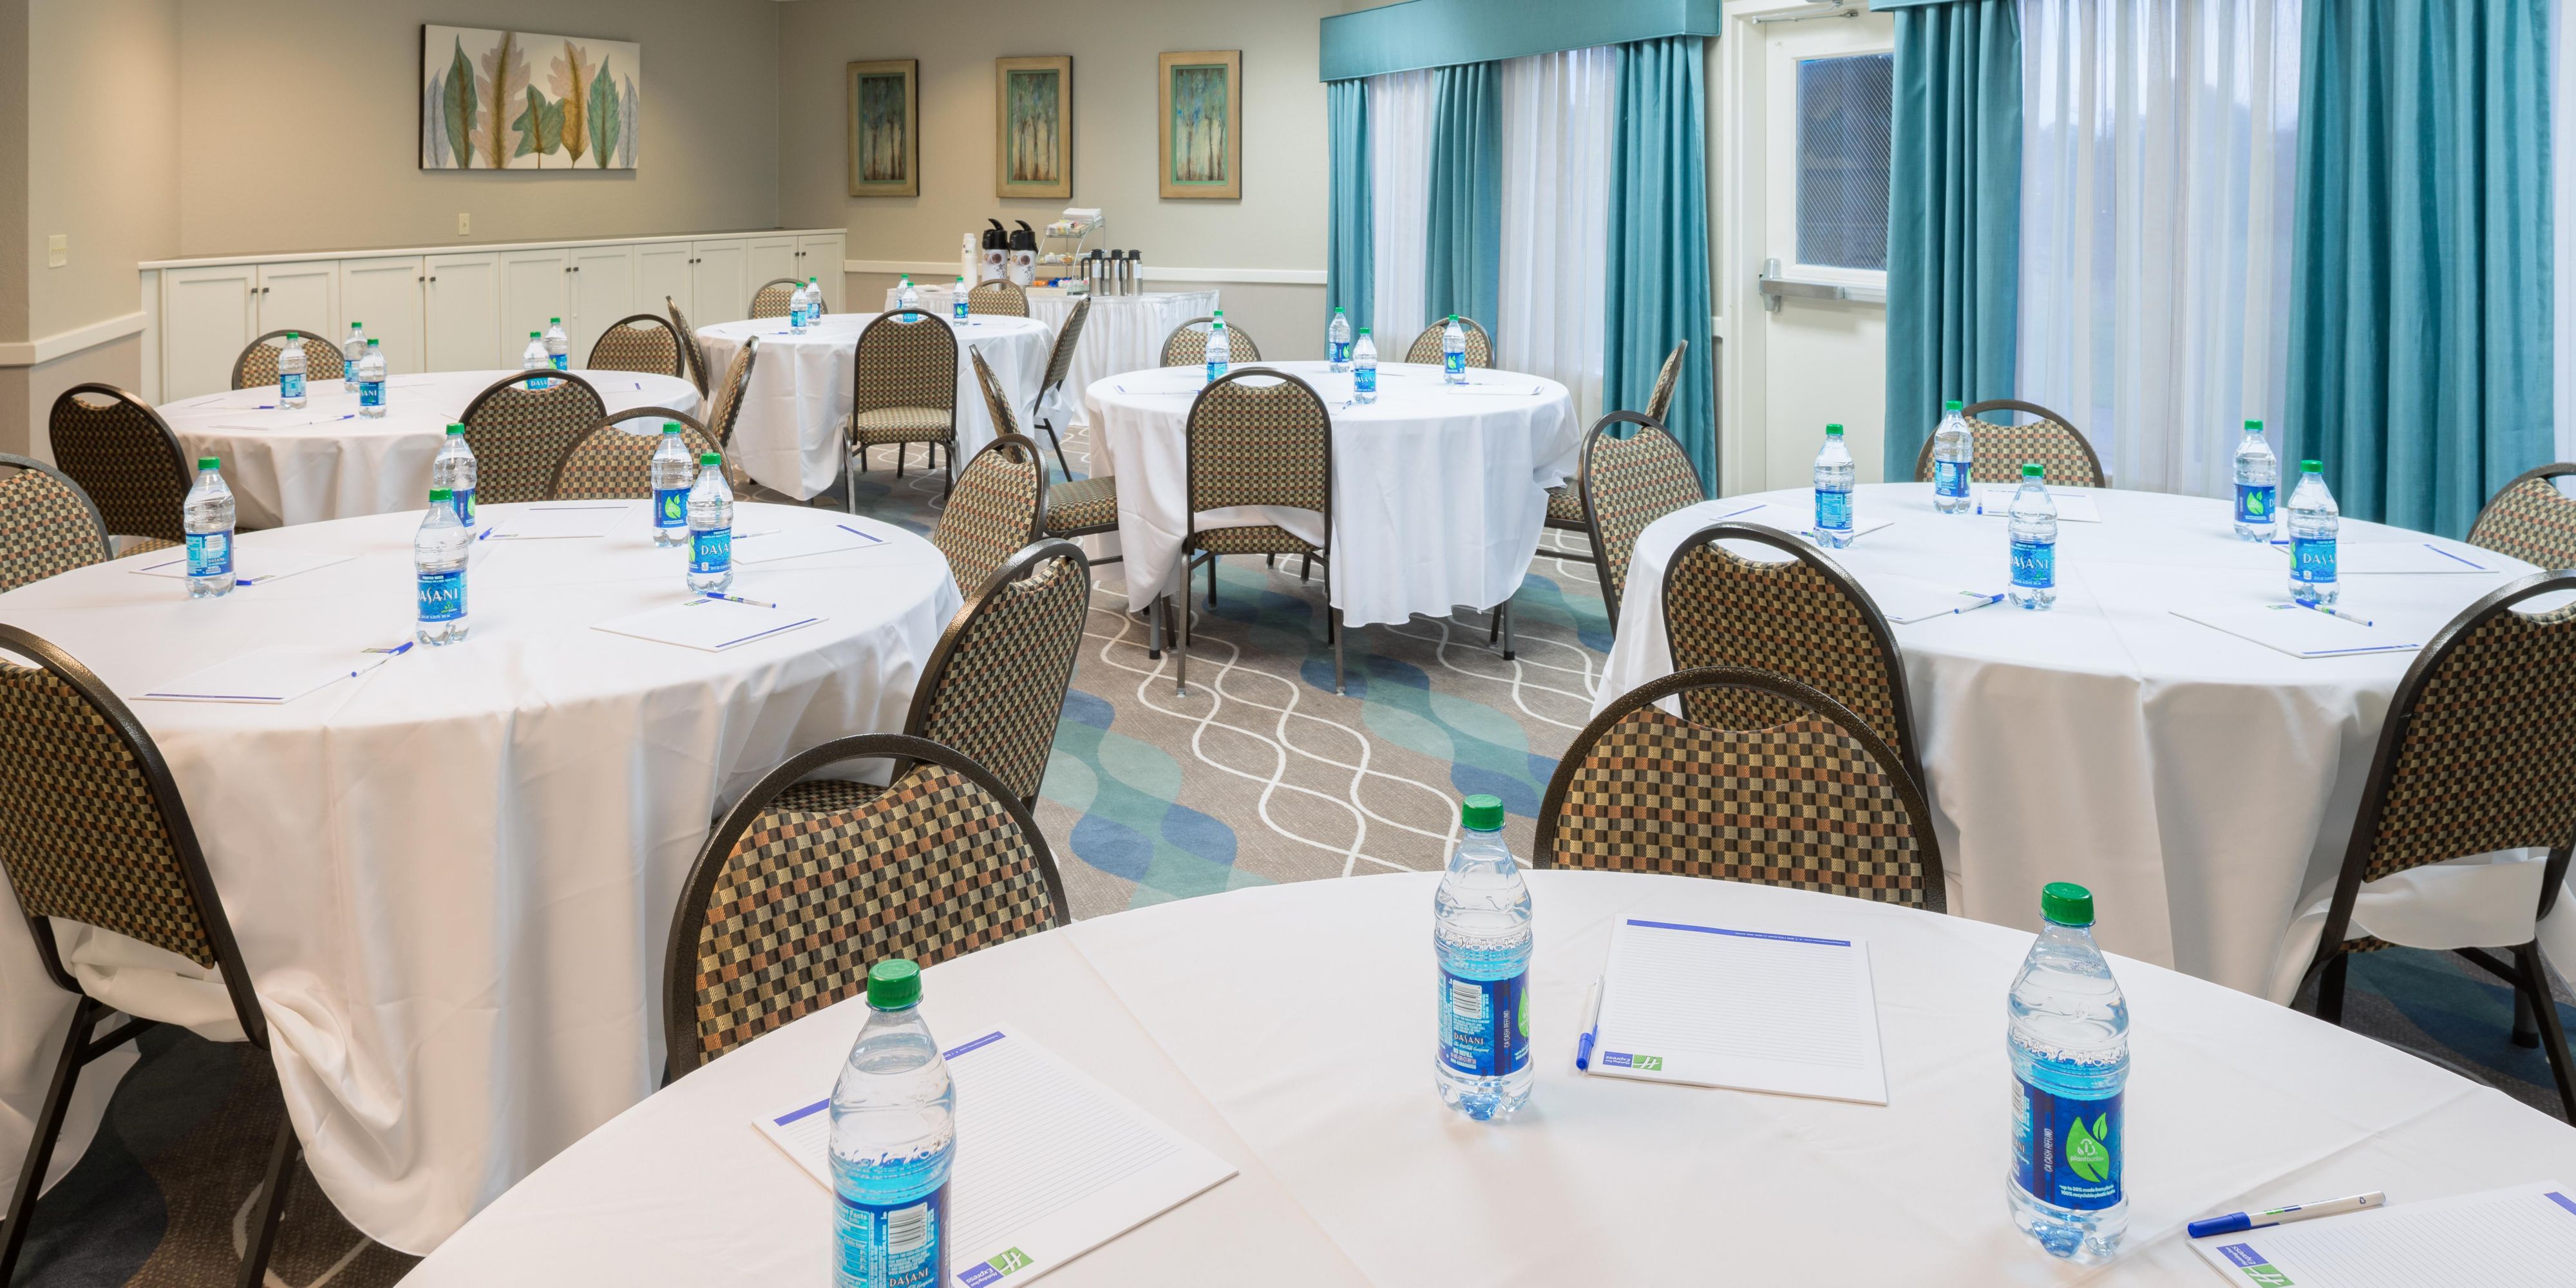 From corporate meetings to team training and events we offer over 1100 square feet of total meeting space to fit your needs. With two dedicated meeting spaces set up to your individual needs let us take the hassle of hosting your next event. Contact our dedicated event planner for more information on pricing and availability. 